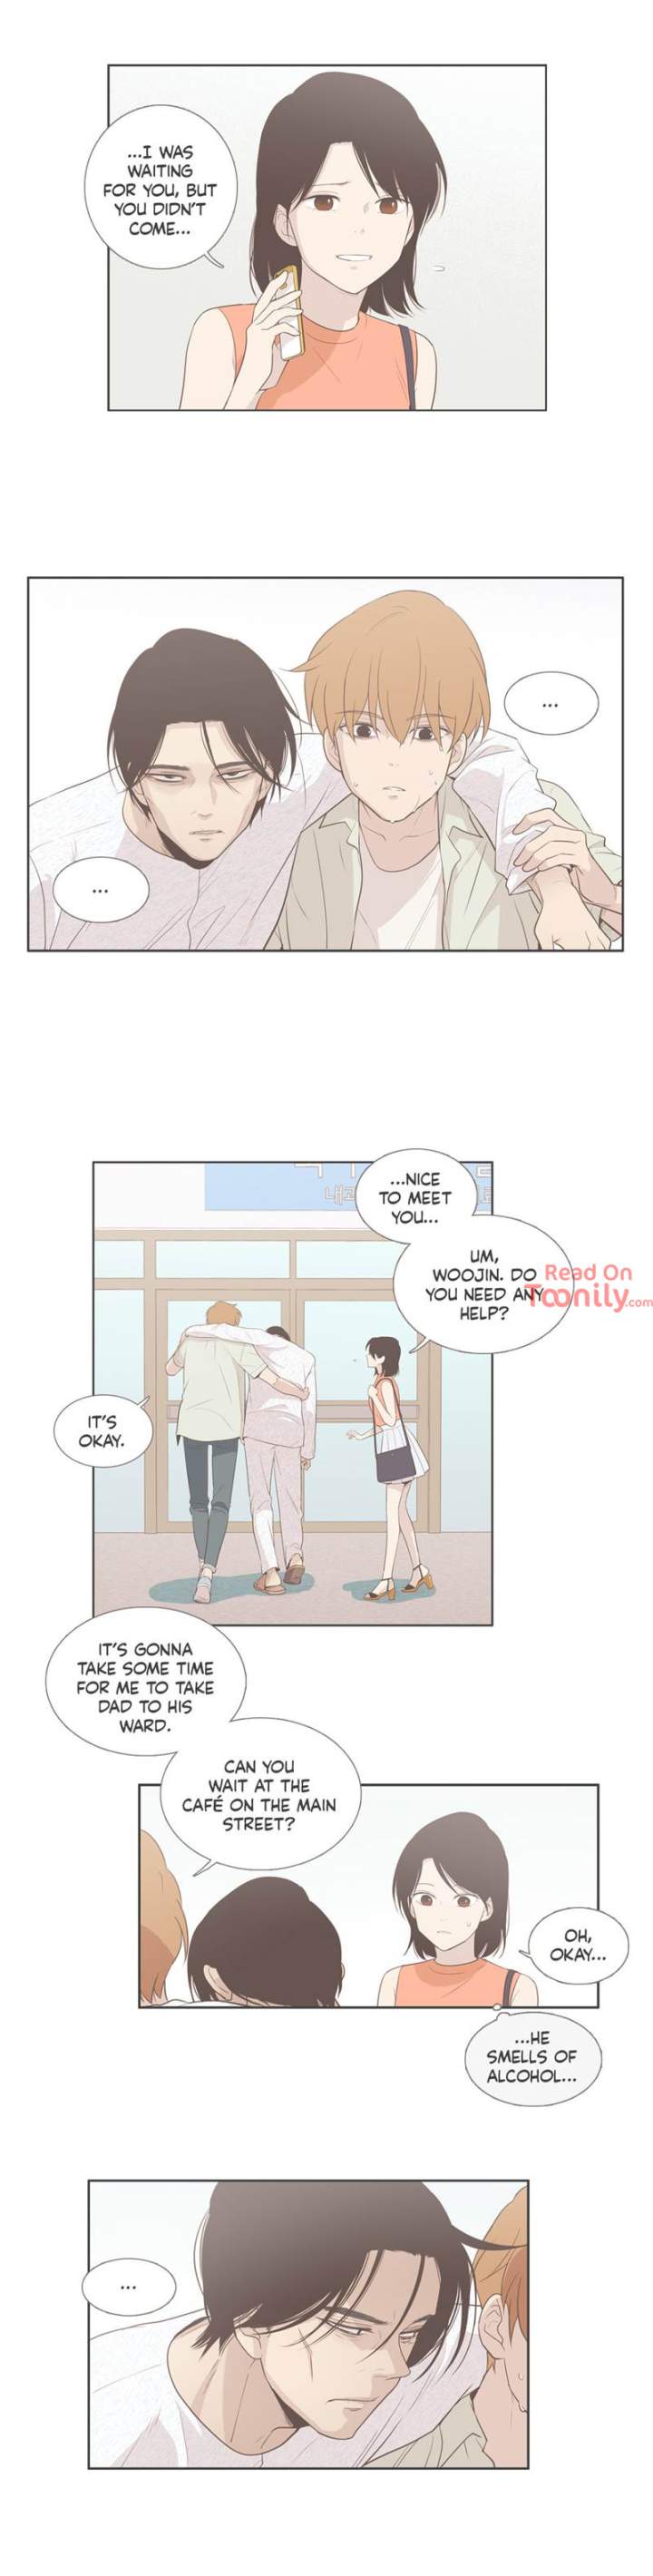 Something About Us - Chapter 91 Page 9